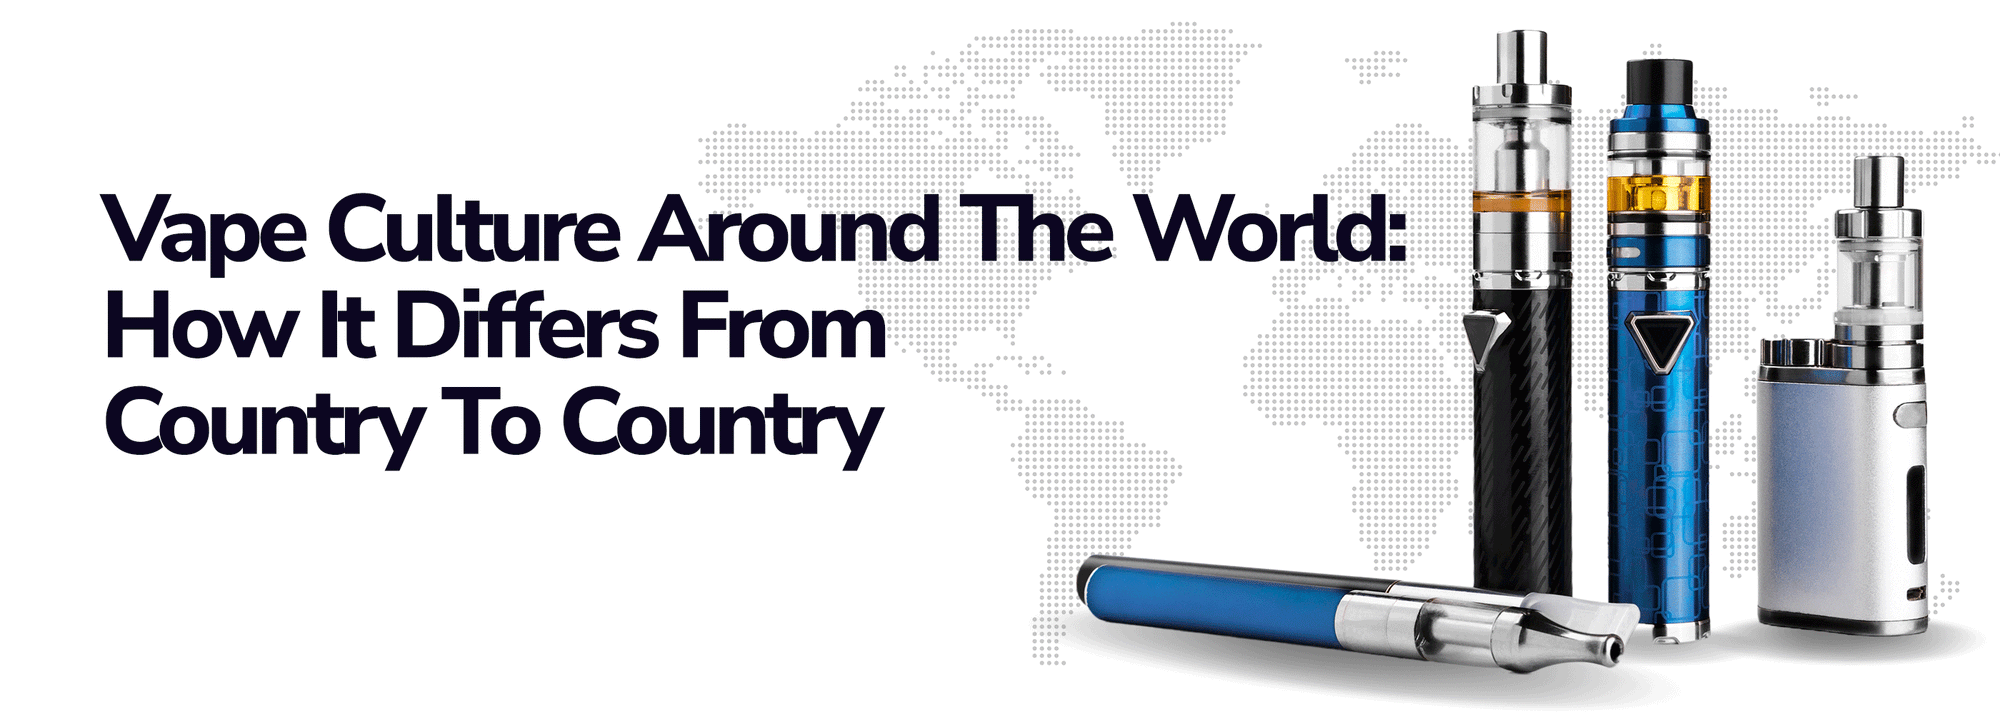 Vape Culture Around The World: How It Differs From Country To Country  | Wick and Wire Co, Melbourne Australia